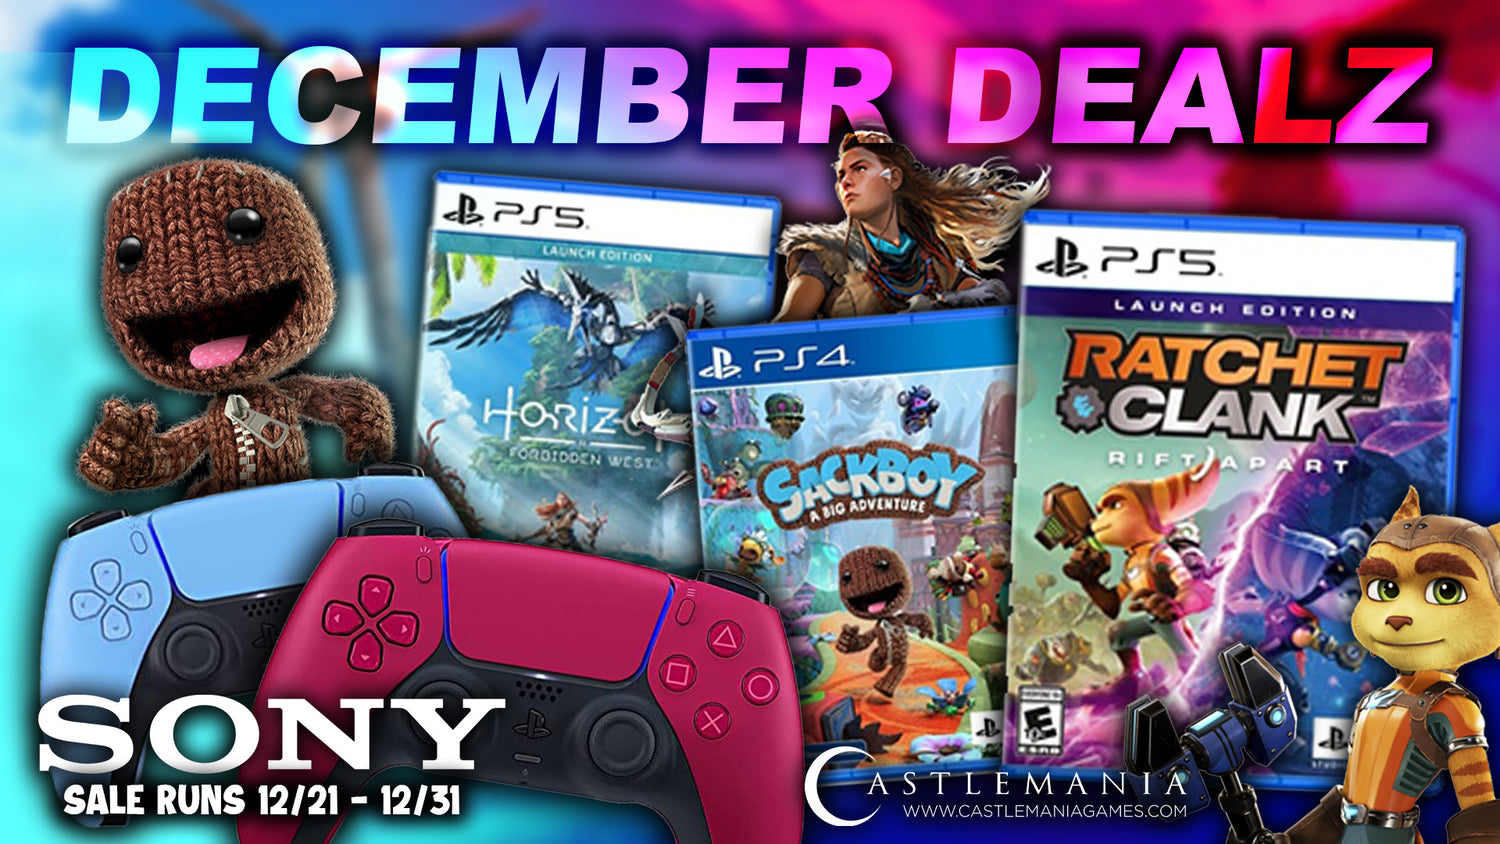 Save on Dealz from SONY now through December 31st!